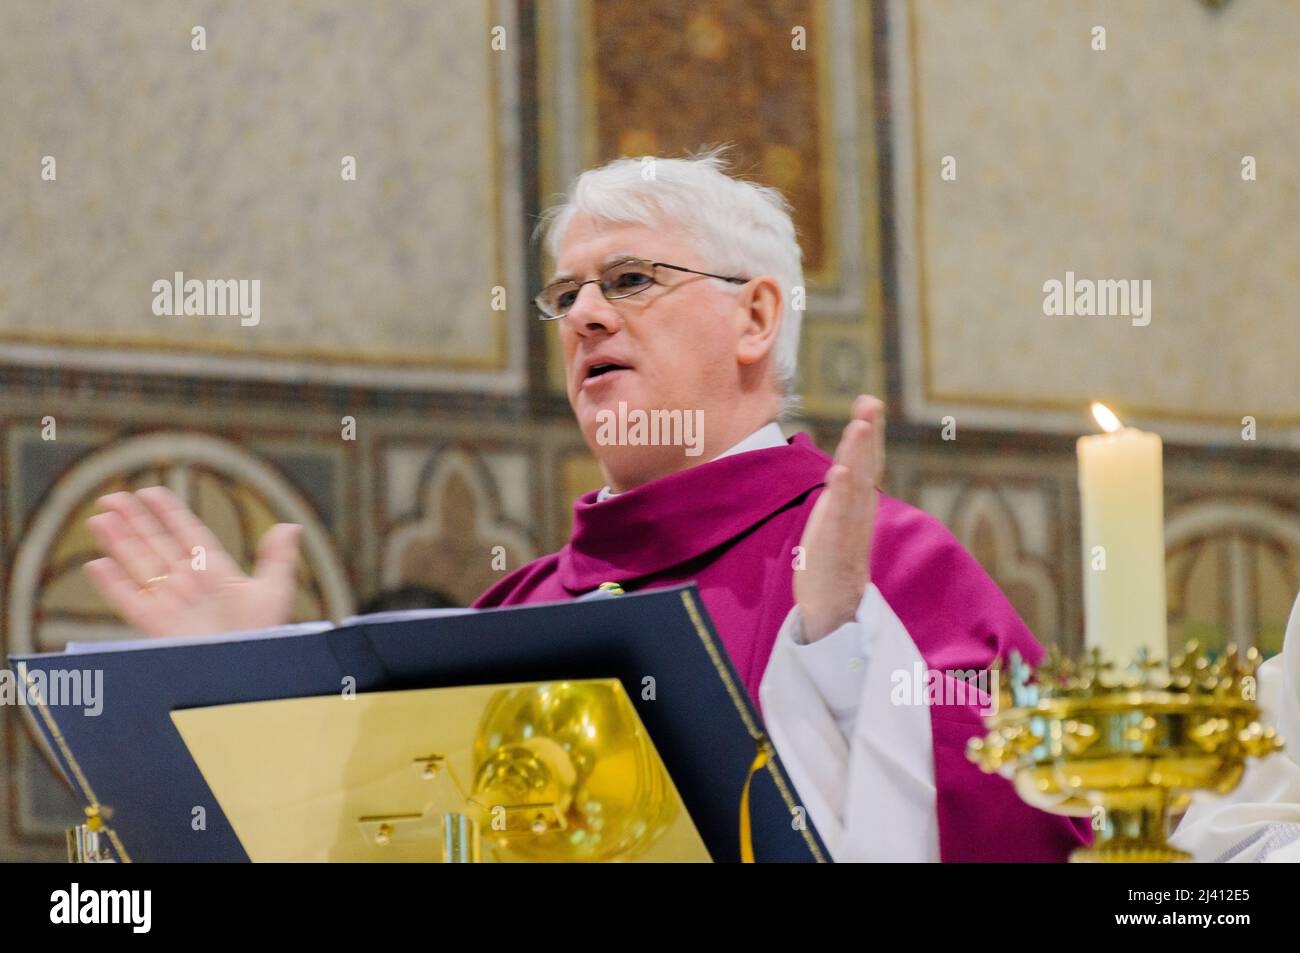 Belfast, Northern Ireland. 2nd January 2010. Bishop Noel Treanor says requiem mass for Cardinal Cahal Daly at Saint Peter's Cathedral. Stock Photo